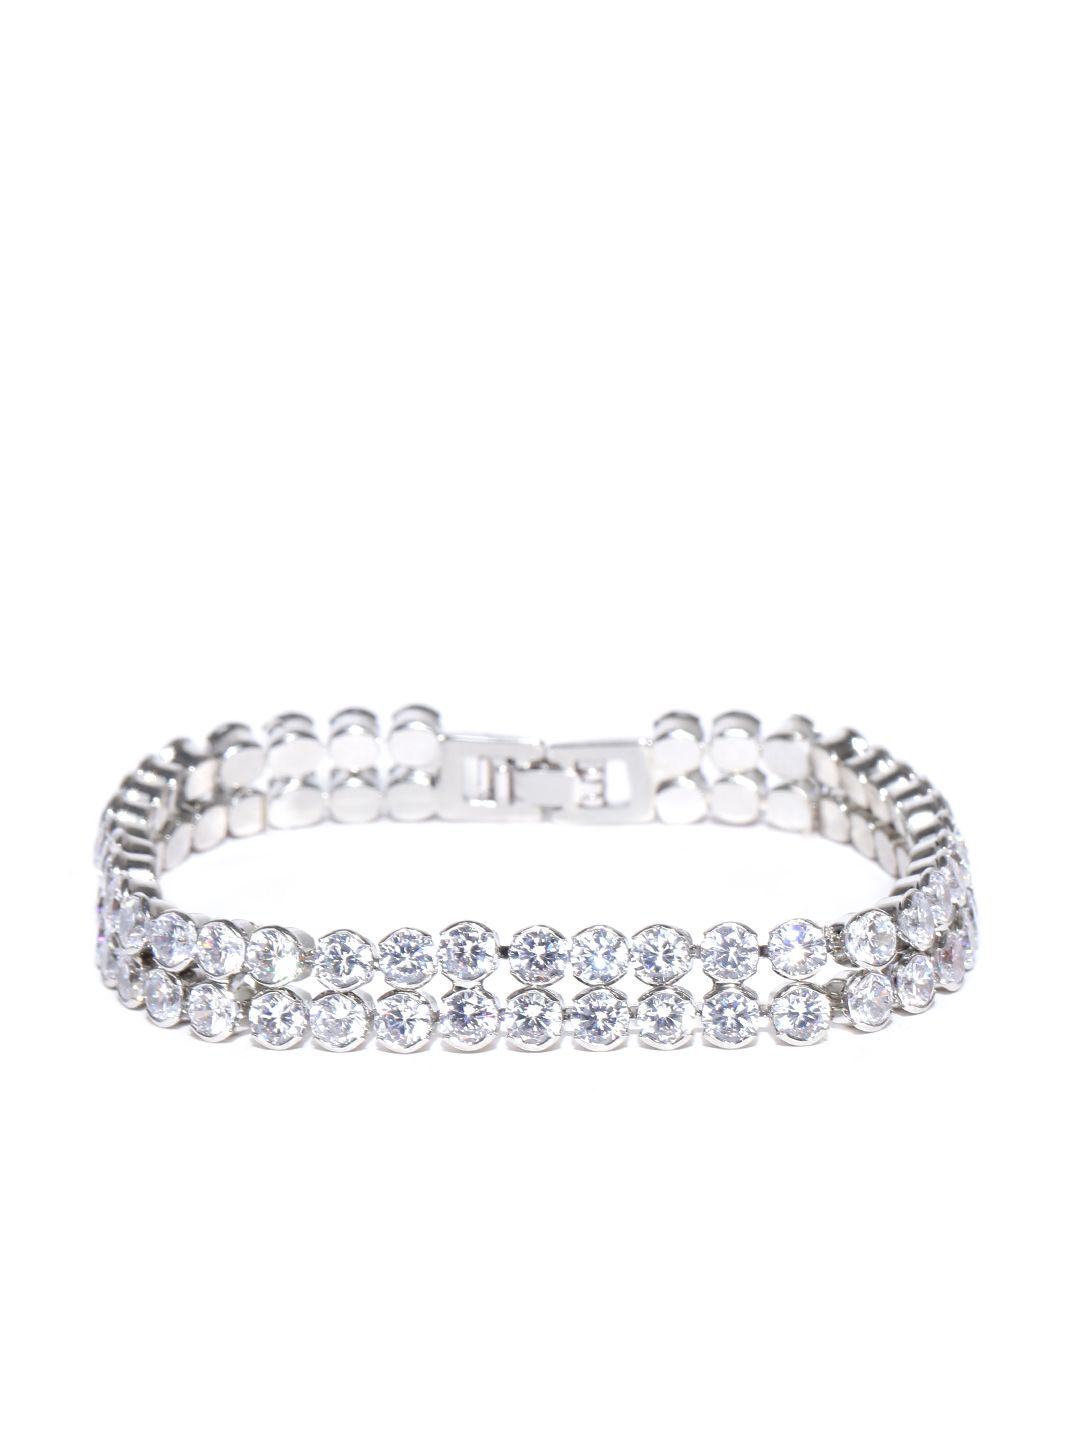 Jewels Galaxy Silver-Toned Rhodium-Plated Stone-Studded Handcrafted Link Bracelet Price in India